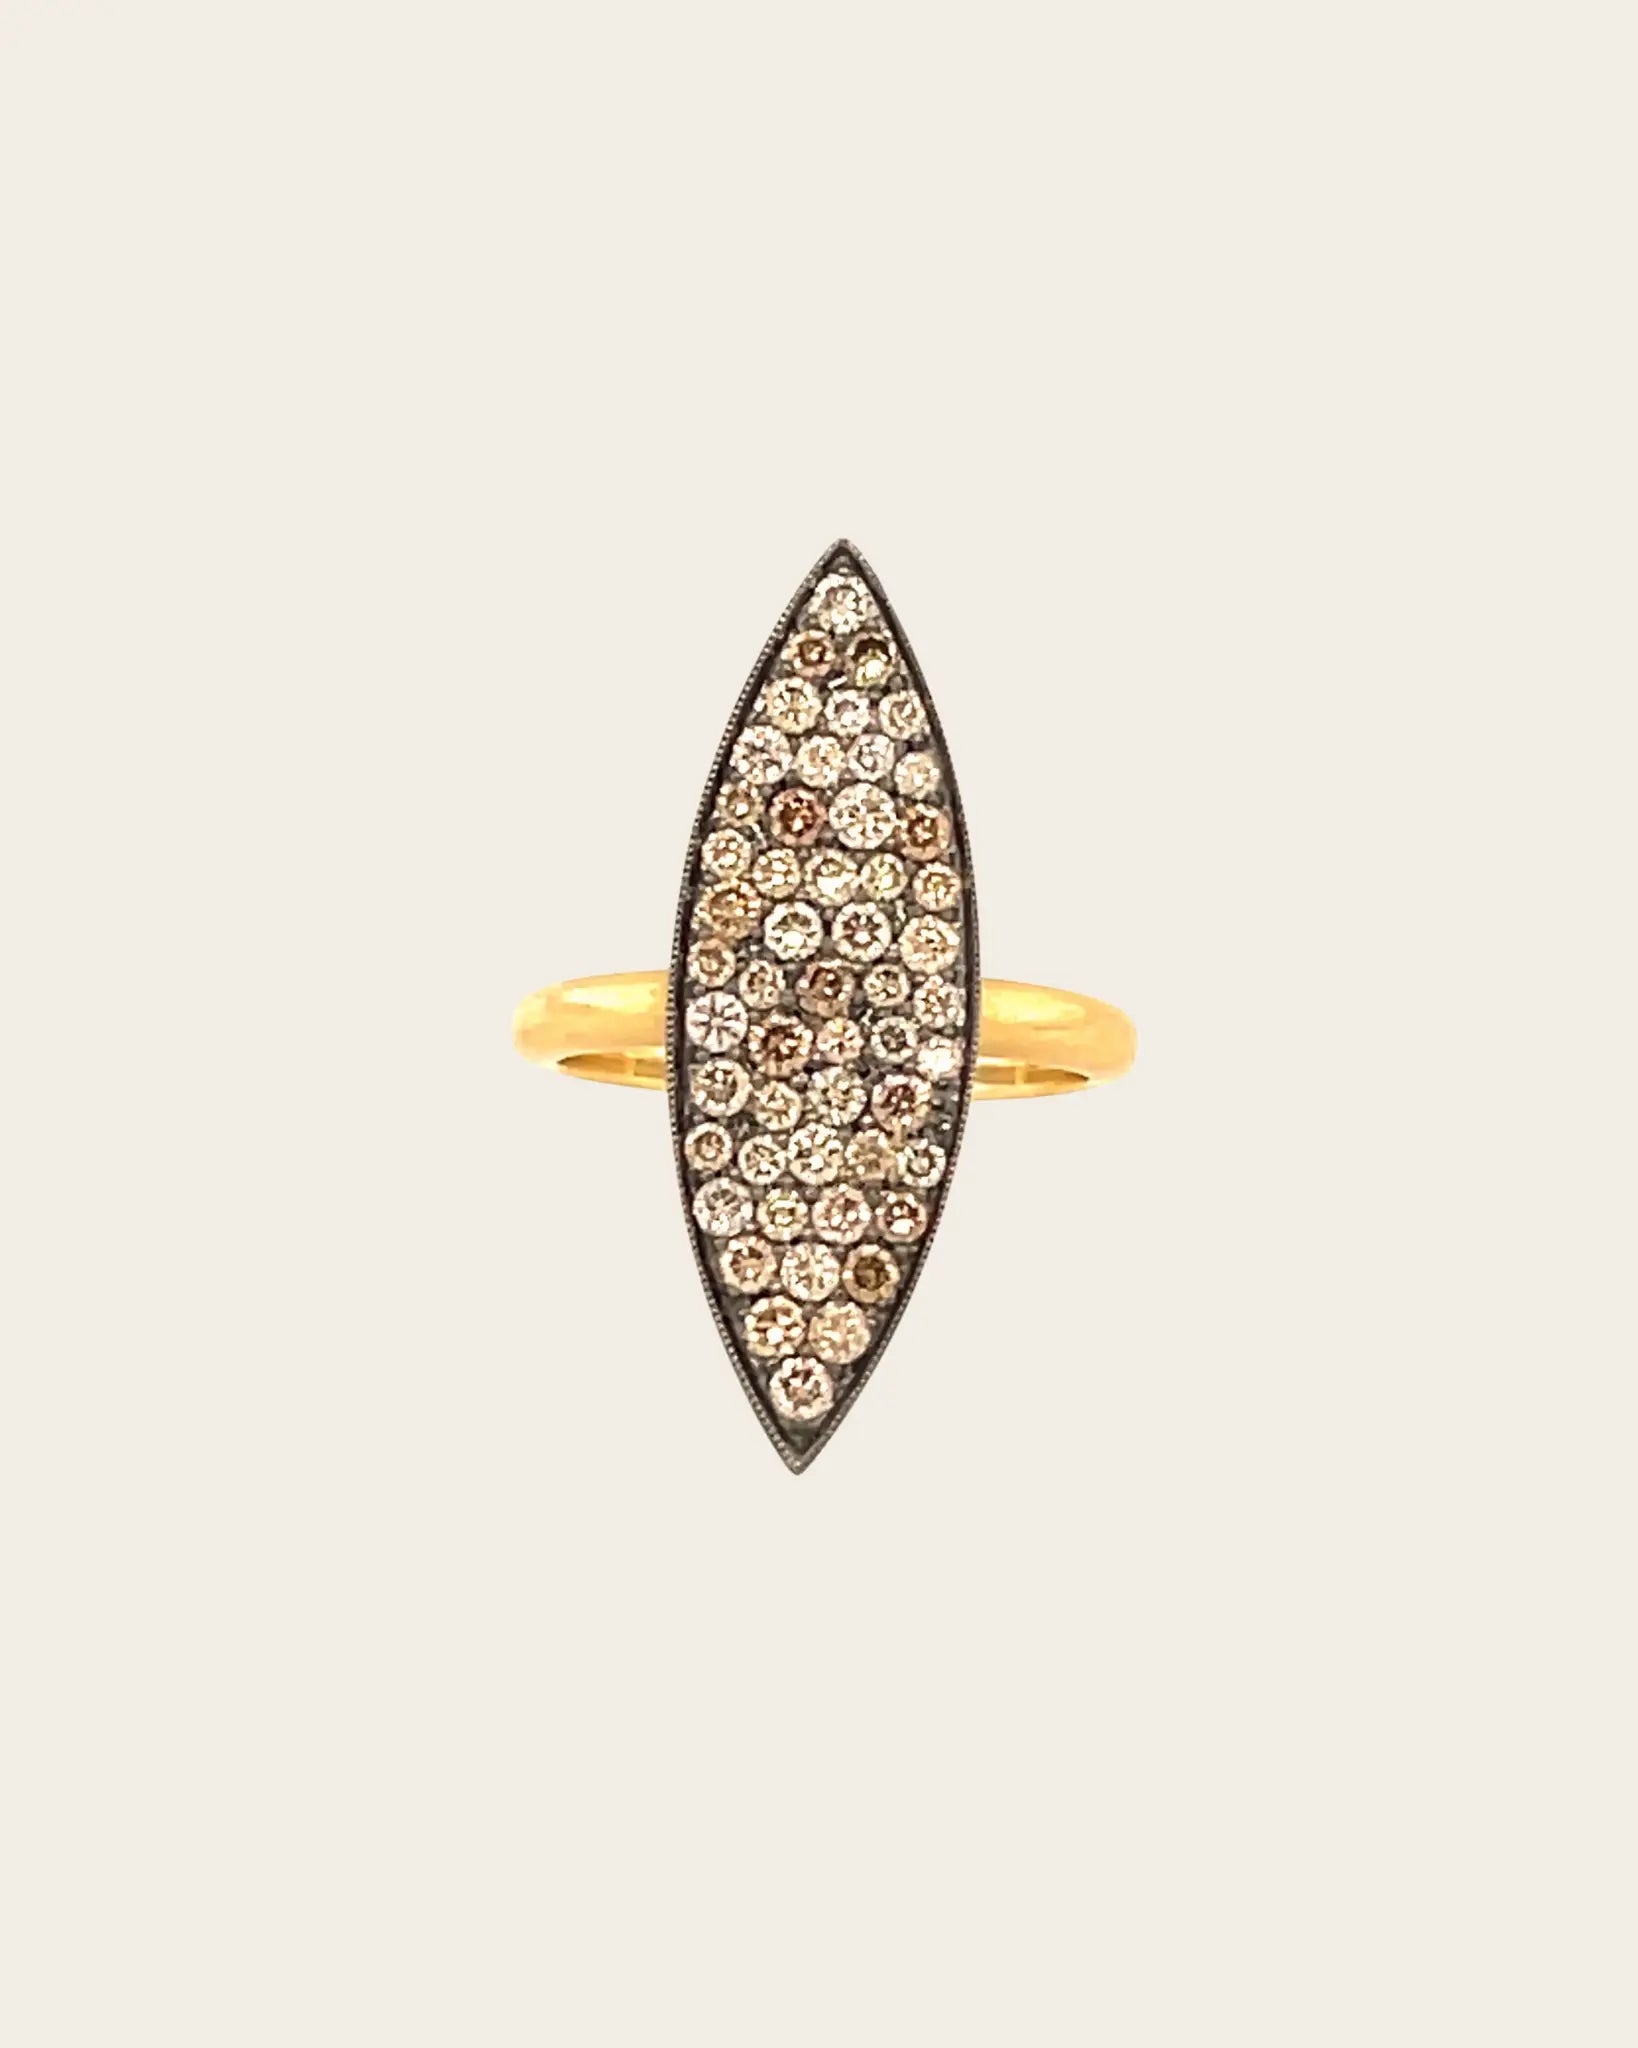 Marquise Champagne Diamond Pave Ring Marquise Champagne Diamond Pave Ring Squash Blossom Original Squash Blossom Original  Squash Blossom Vail